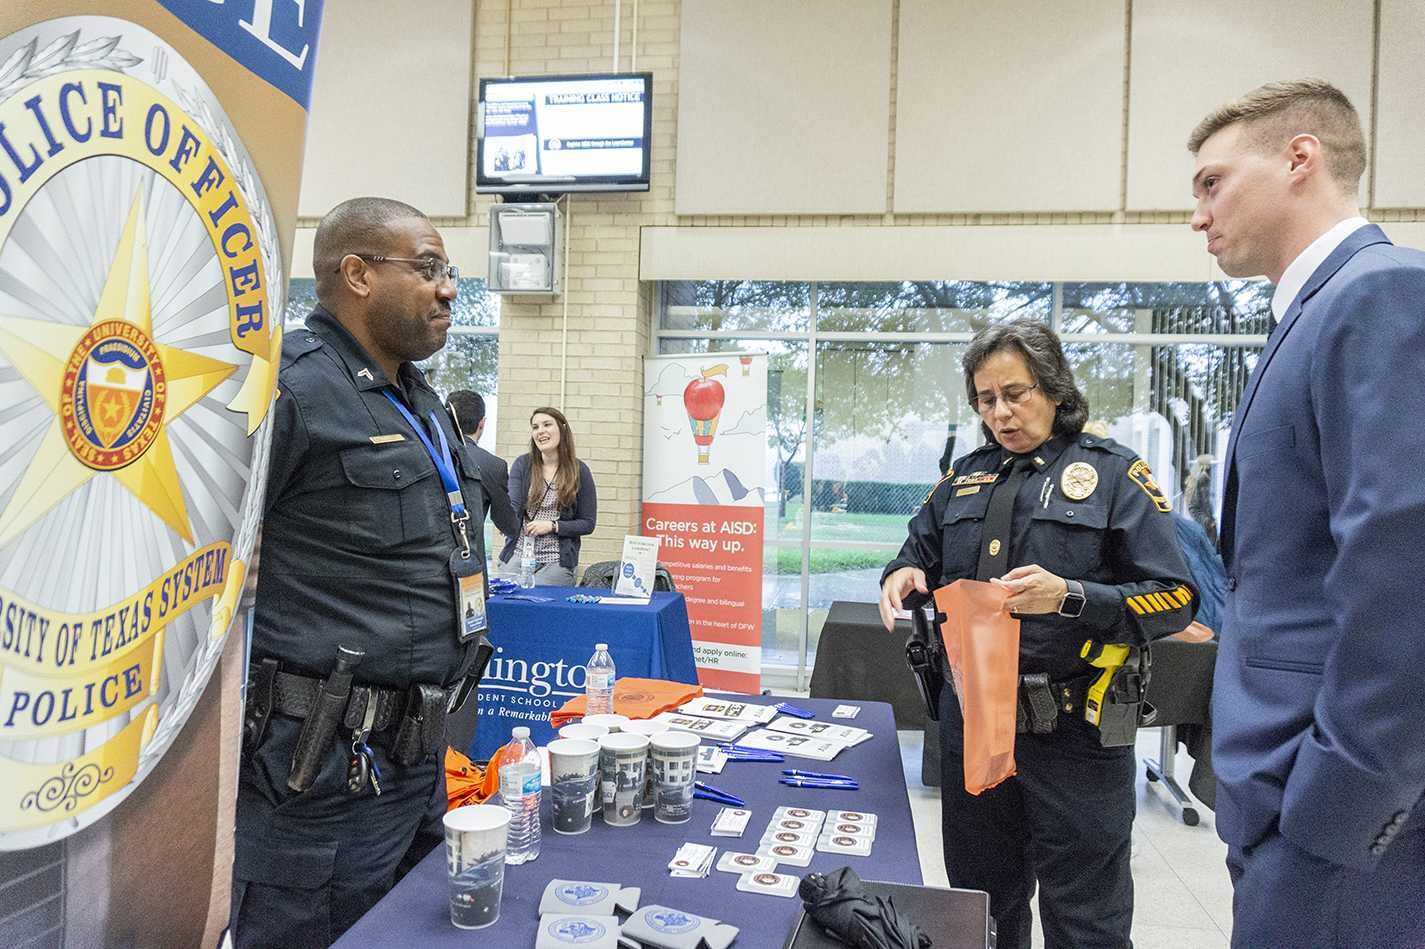 Training Cpl. Robert Yarbrough and Lt. Yvonne RoQue give veteran and NW student Alex Harris information about the University of Texas at Arlington police department.